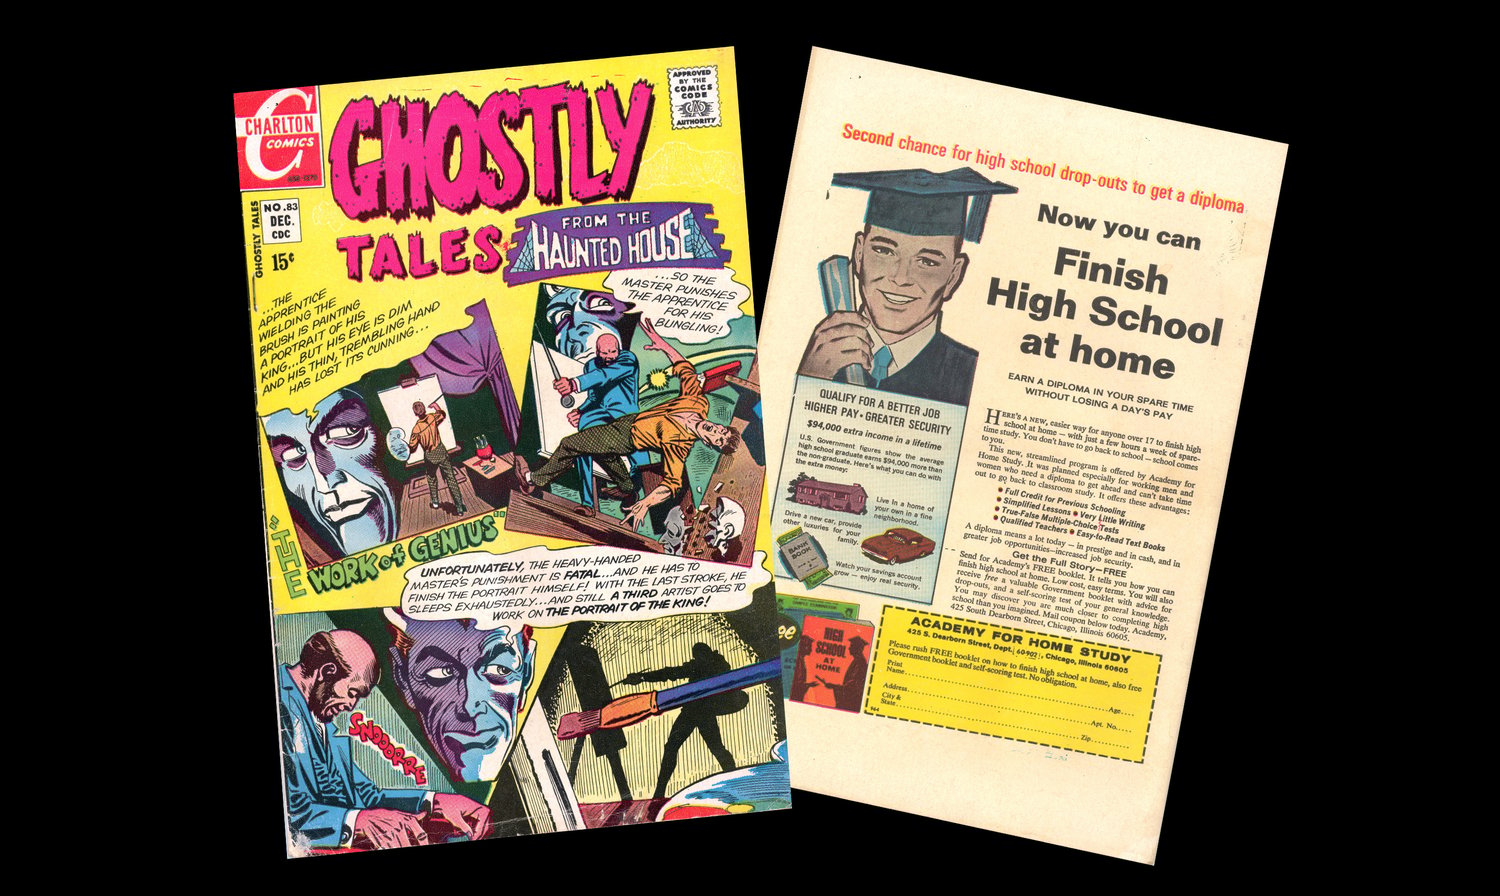 GHOSTLY TALES FROM THE HAUNTED HOUSE #83 Dec 1970